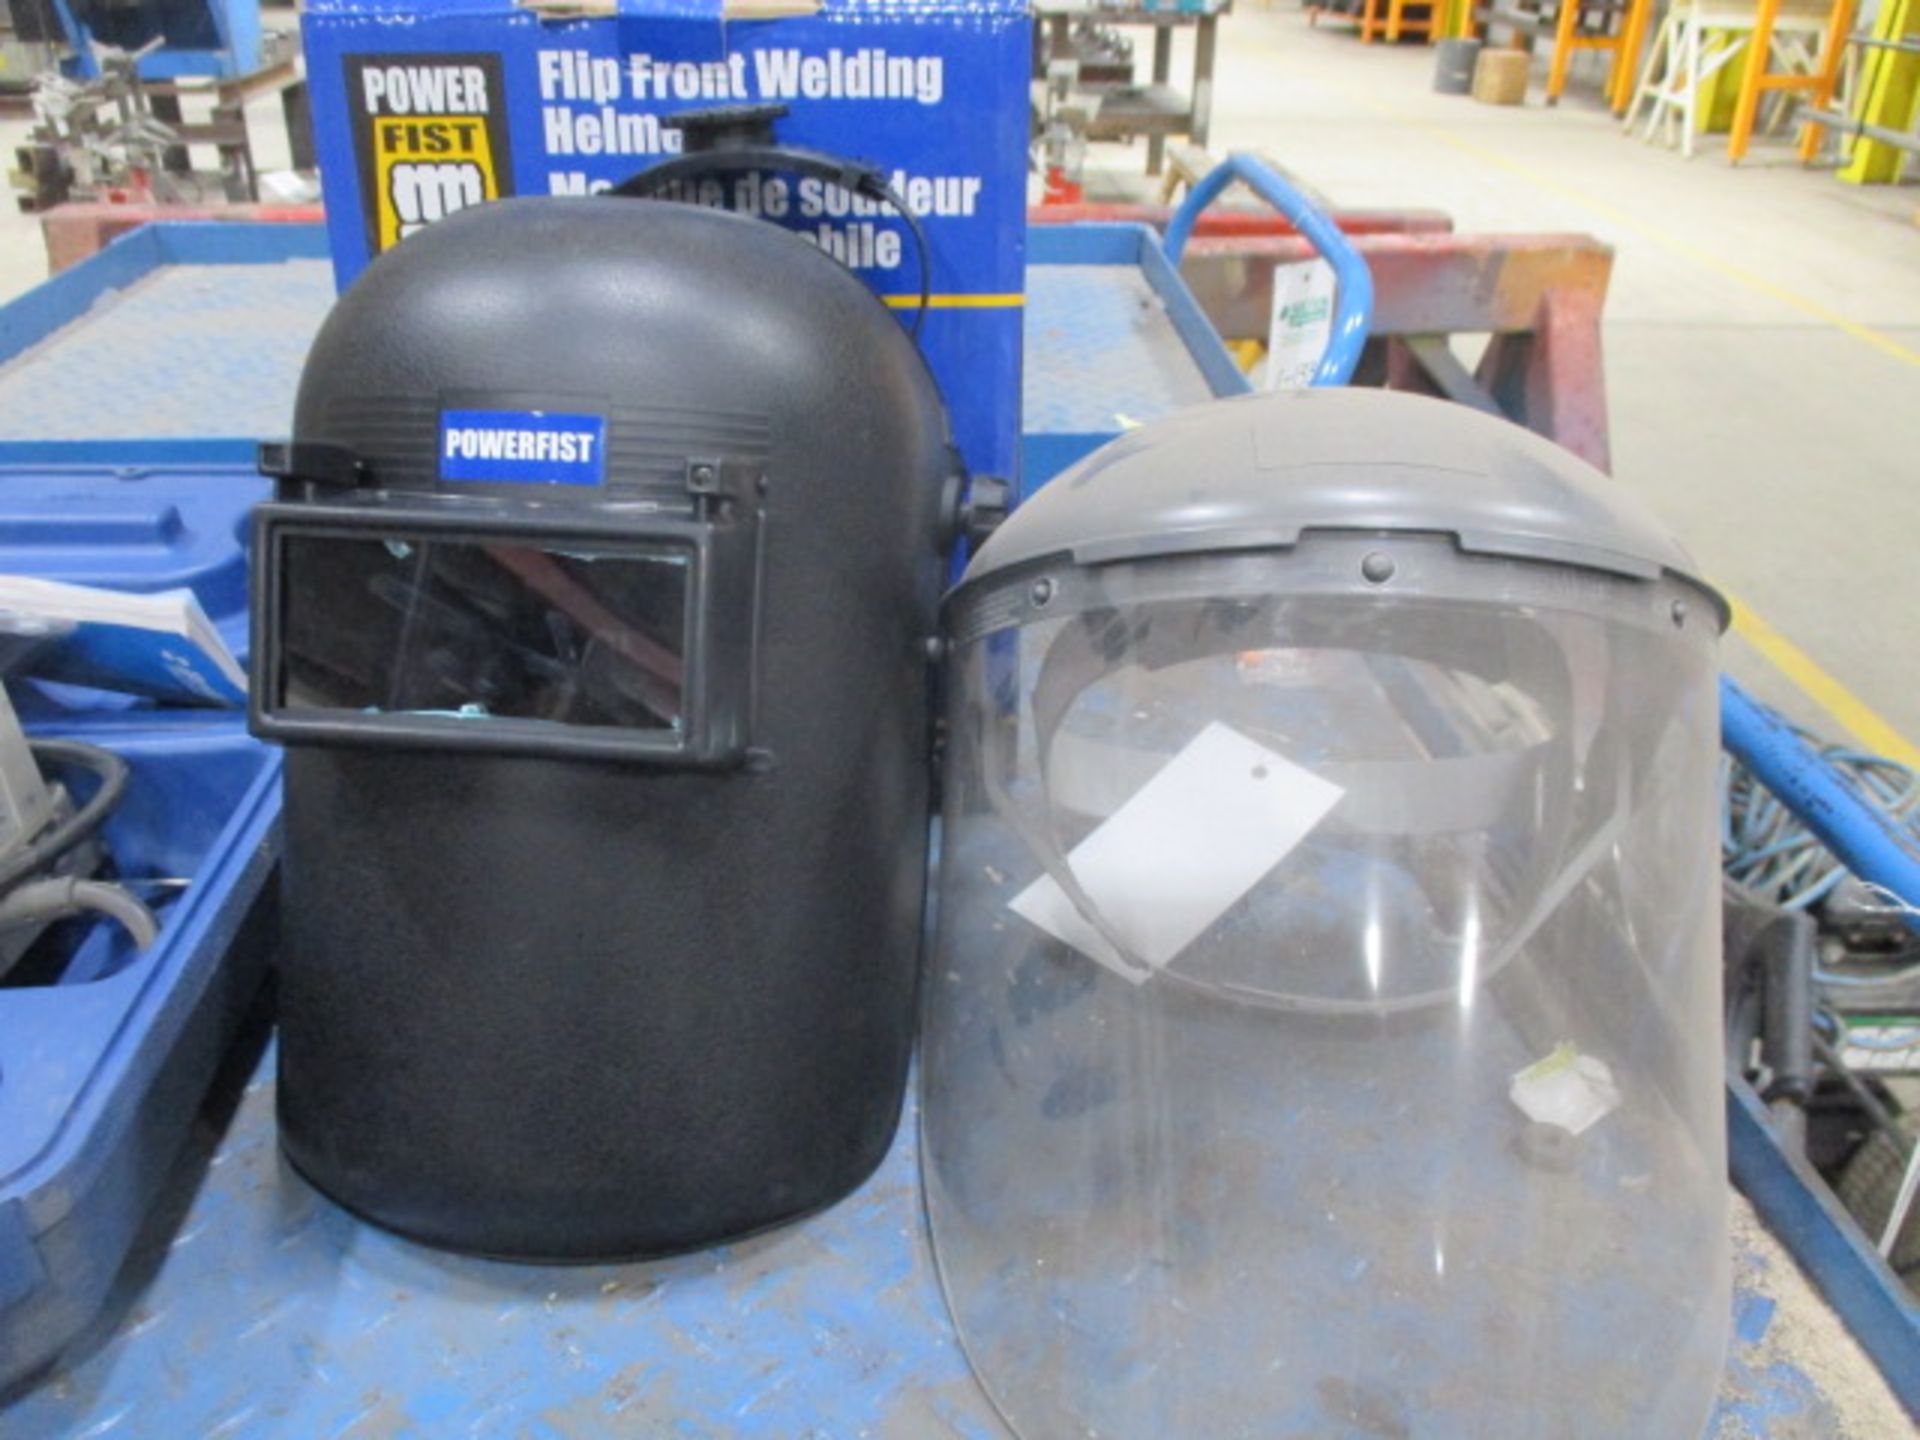 DHC Load Tester, Drill Doctor bit sharpner and Welding Helmet and face shield - Image 3 of 3